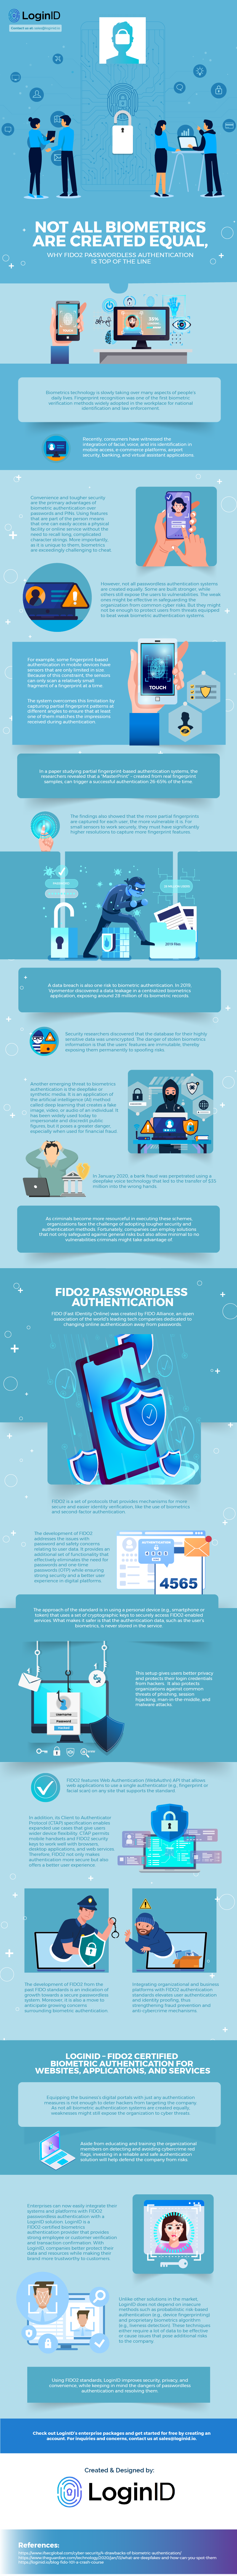 Not All Biometrics are Created Equal, Why FIDO2 Passwordless Authentication is Top of the Line_InfographicimageUYHIUEDw4.10